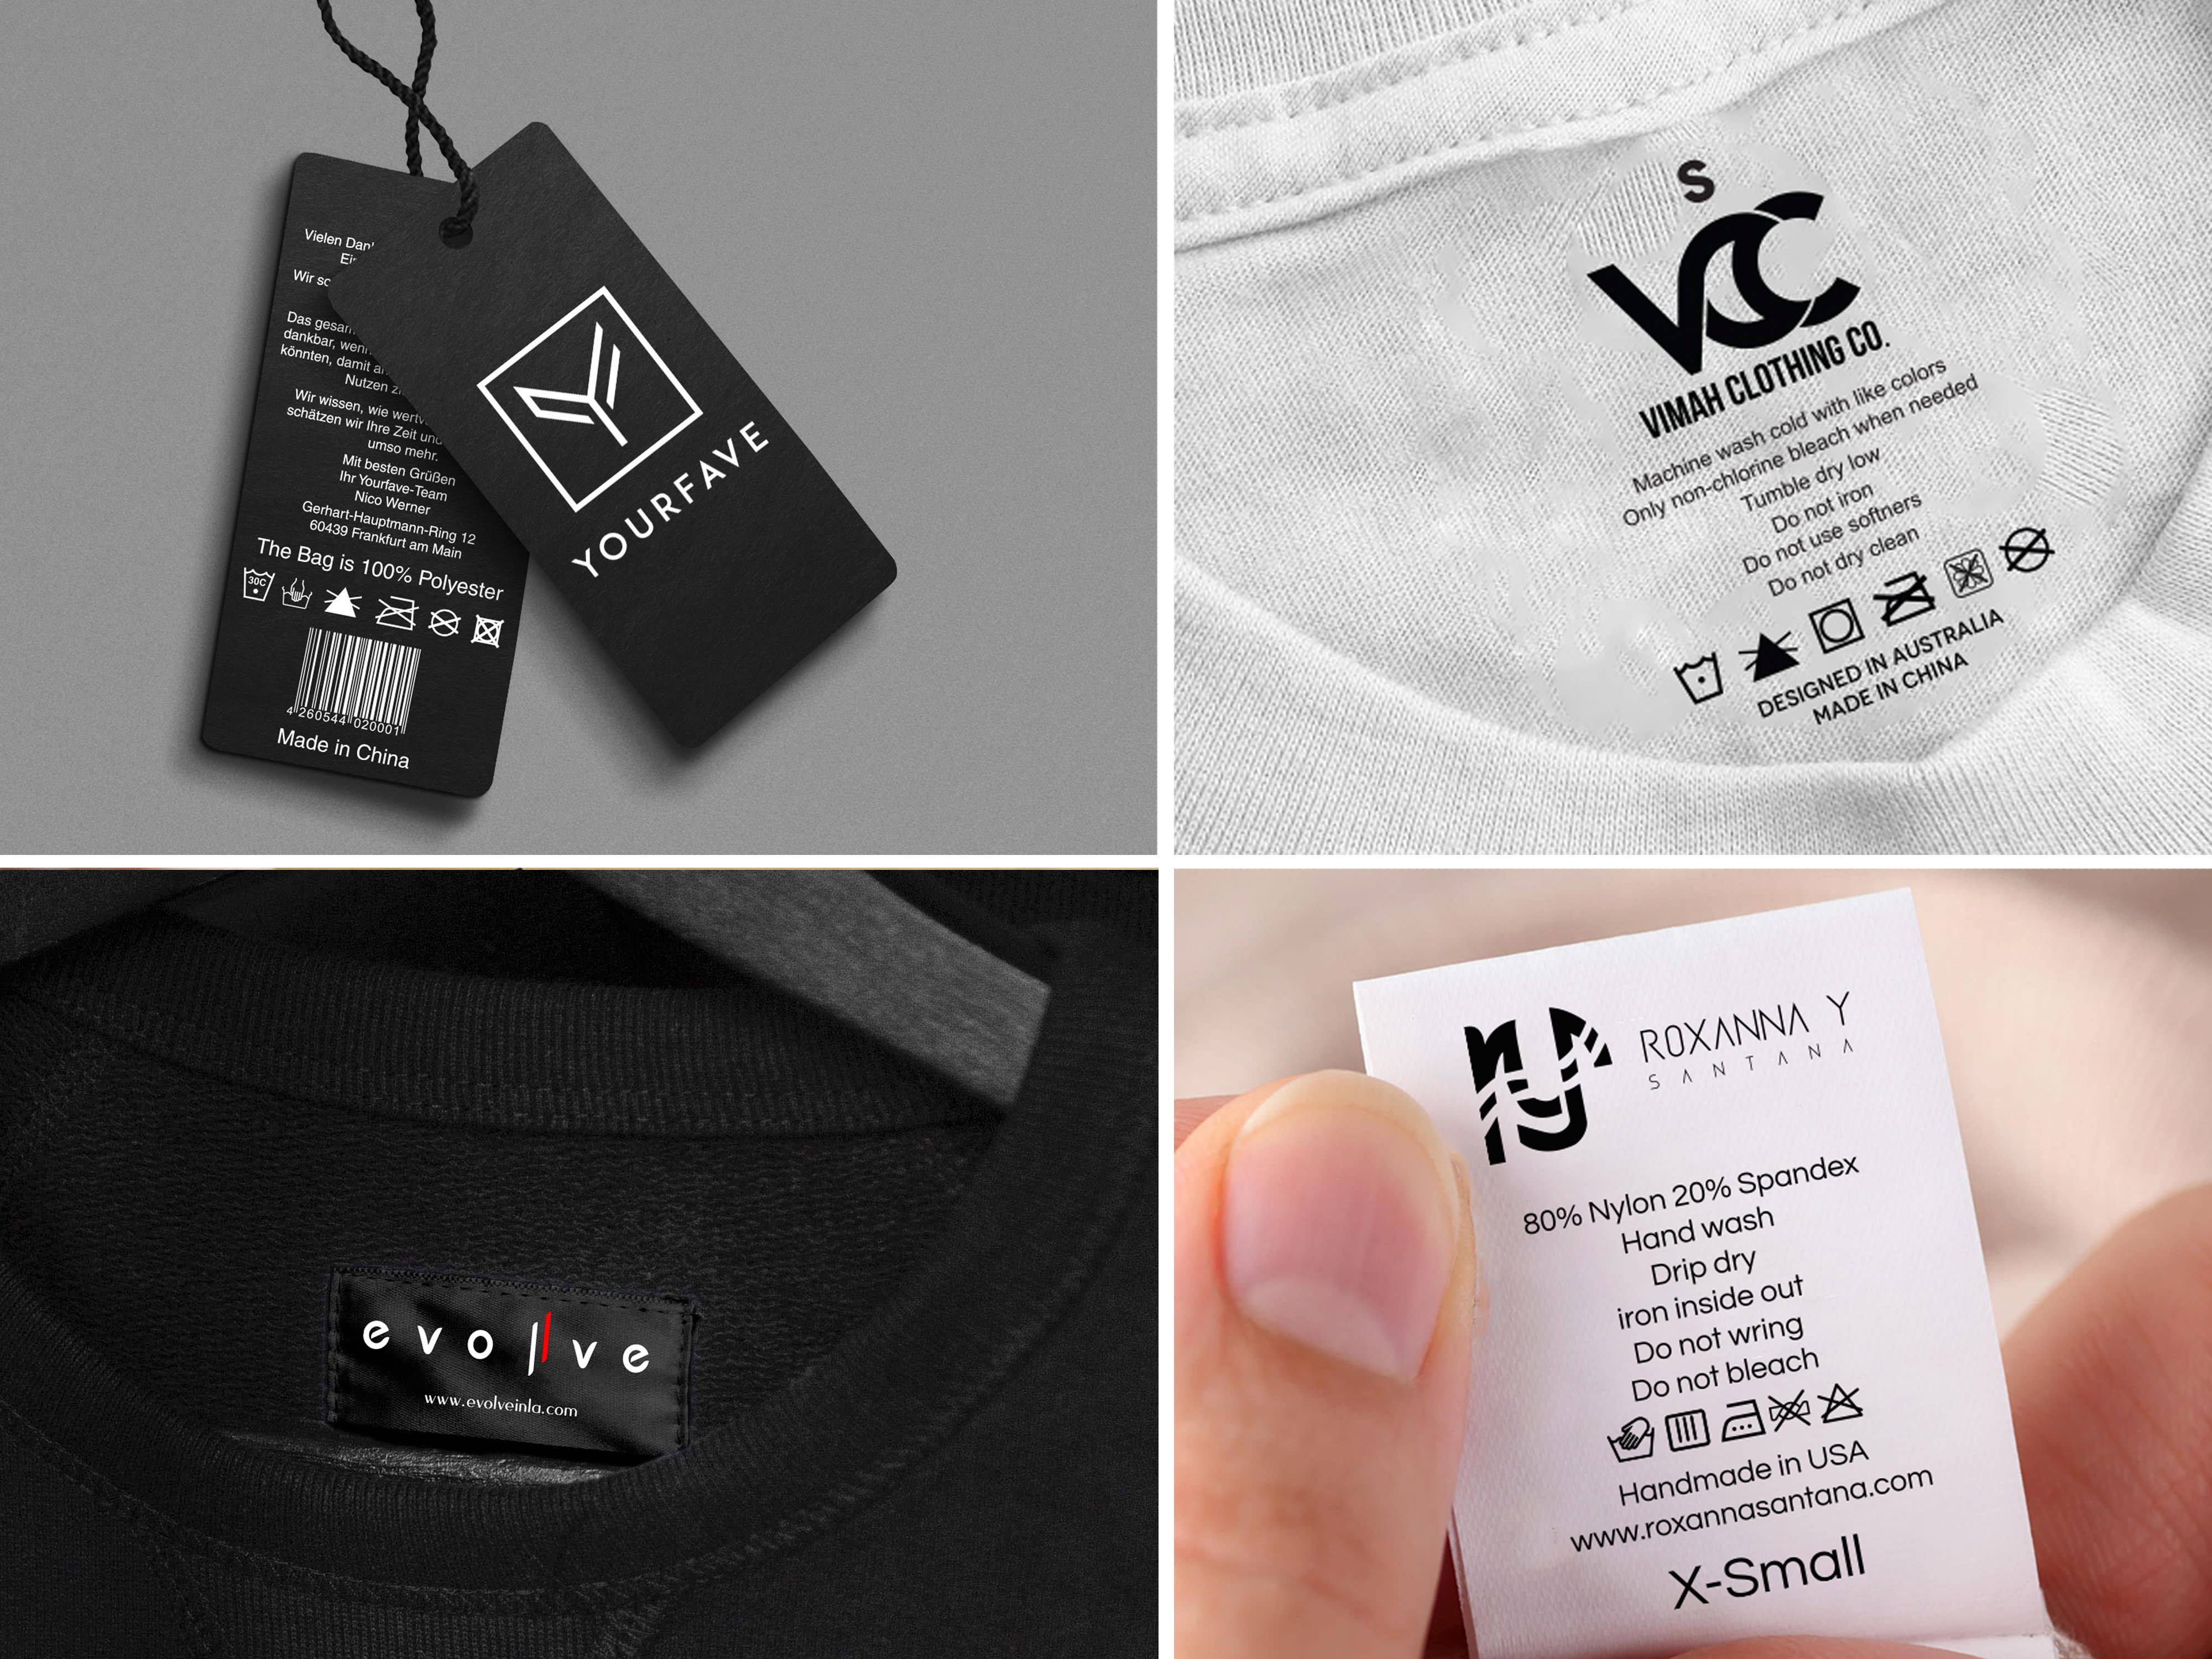 CLOTHING LABELS